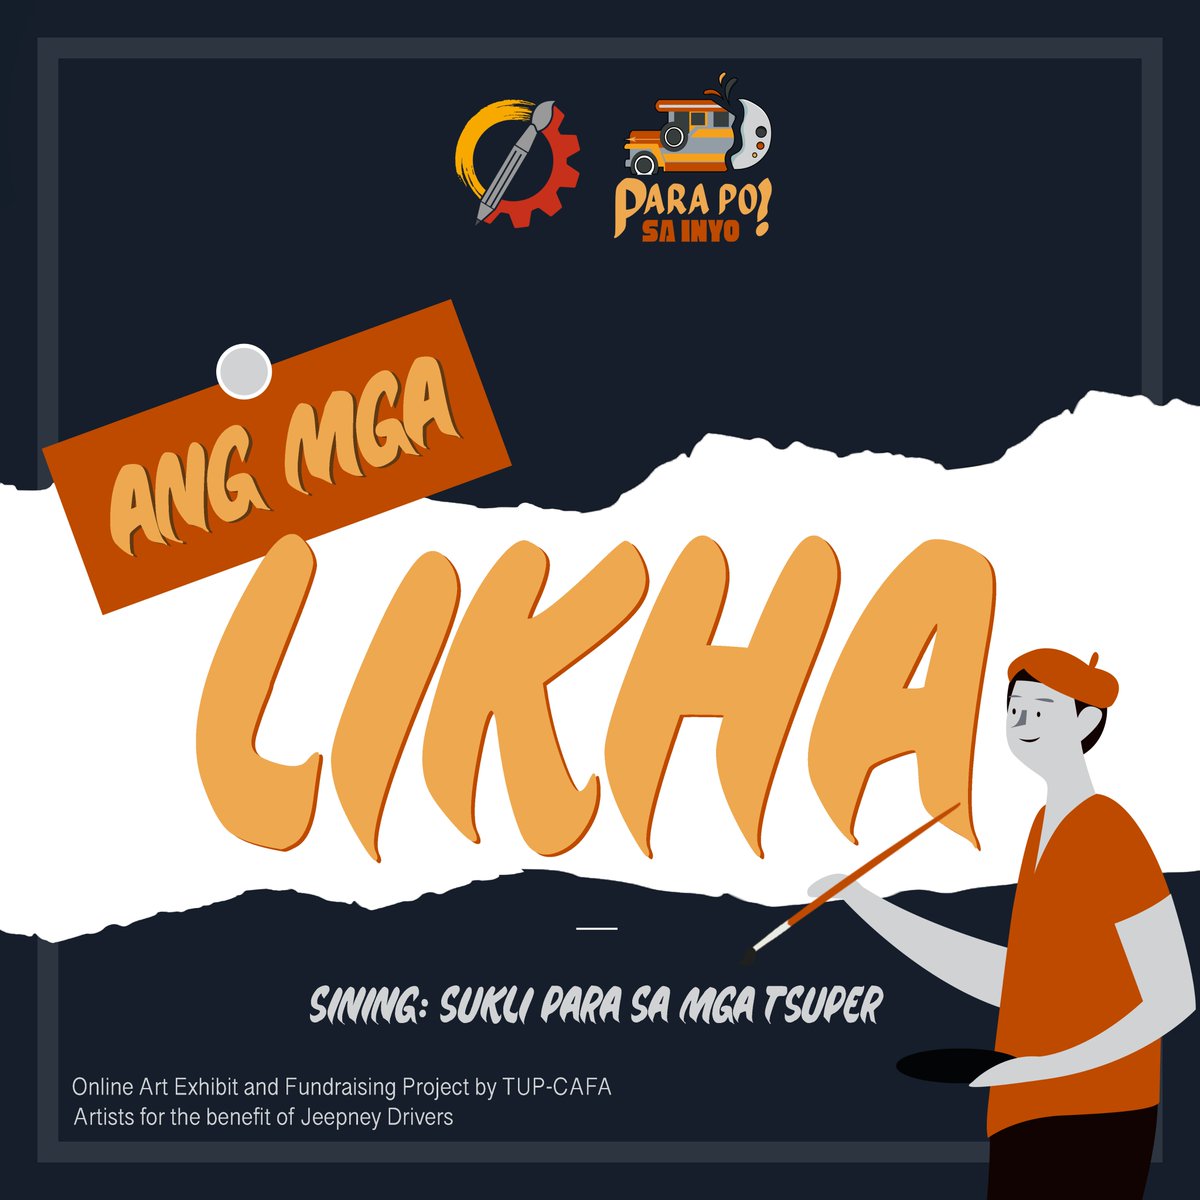 If you have questions or concerns, don't hesitate to send us a message!Finally, PPSI-AE are pleased to present to you, "Ang mga Likha"